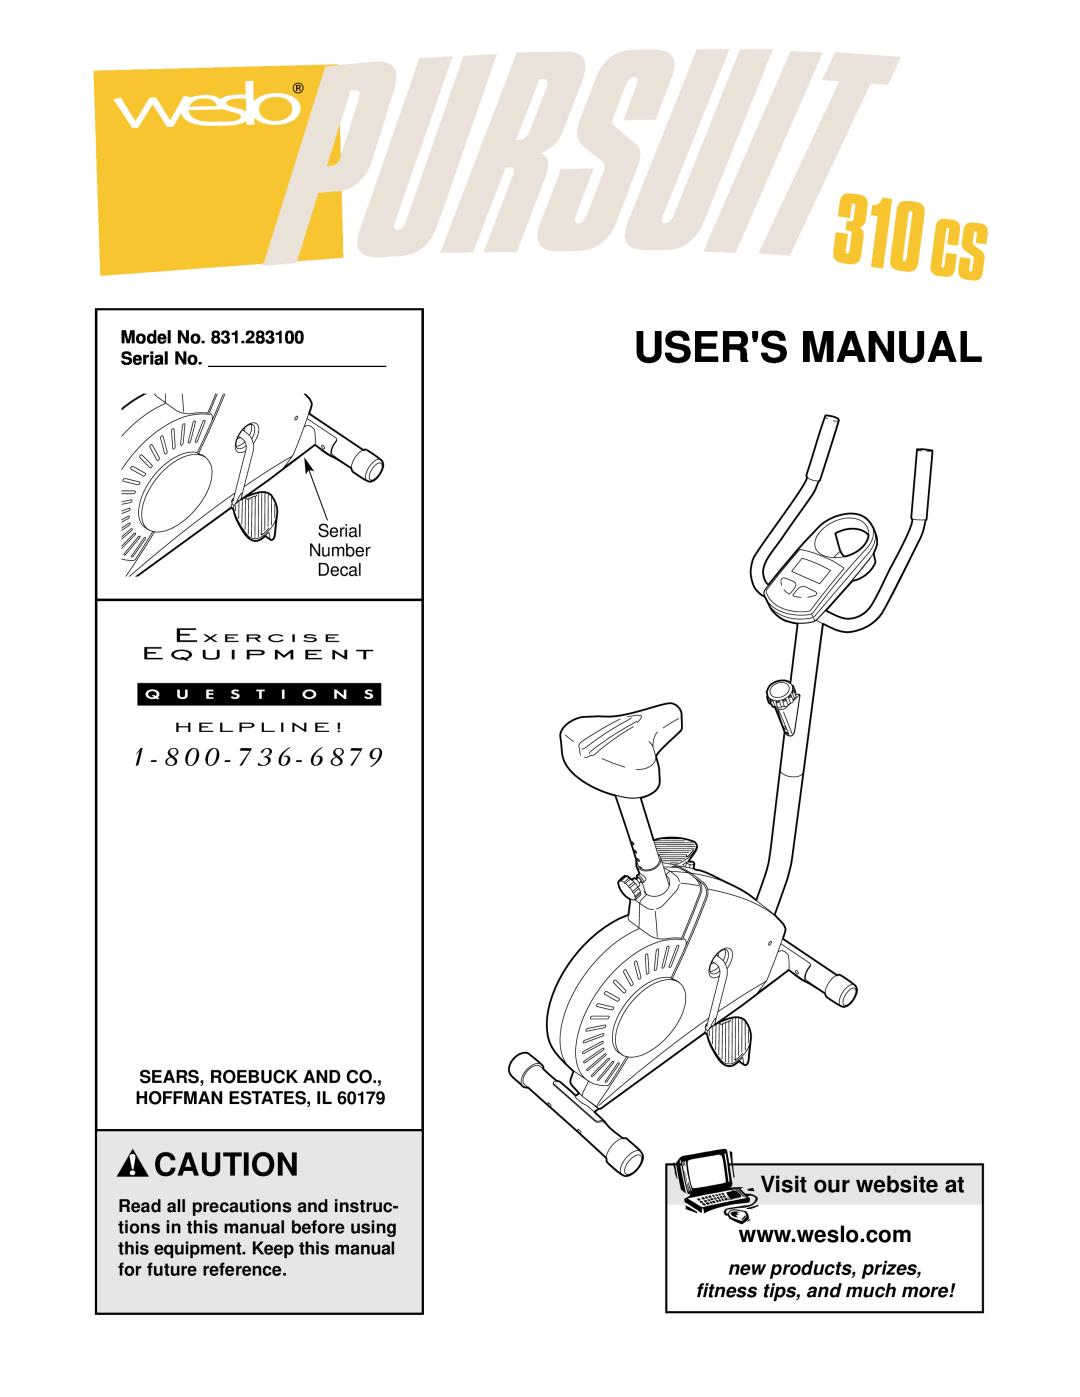 Weslo 310 CS user manual Model No Serial No, Sears, Roebuck And Co Hoffman Estates, Il, Users Manual, Visit our website at 